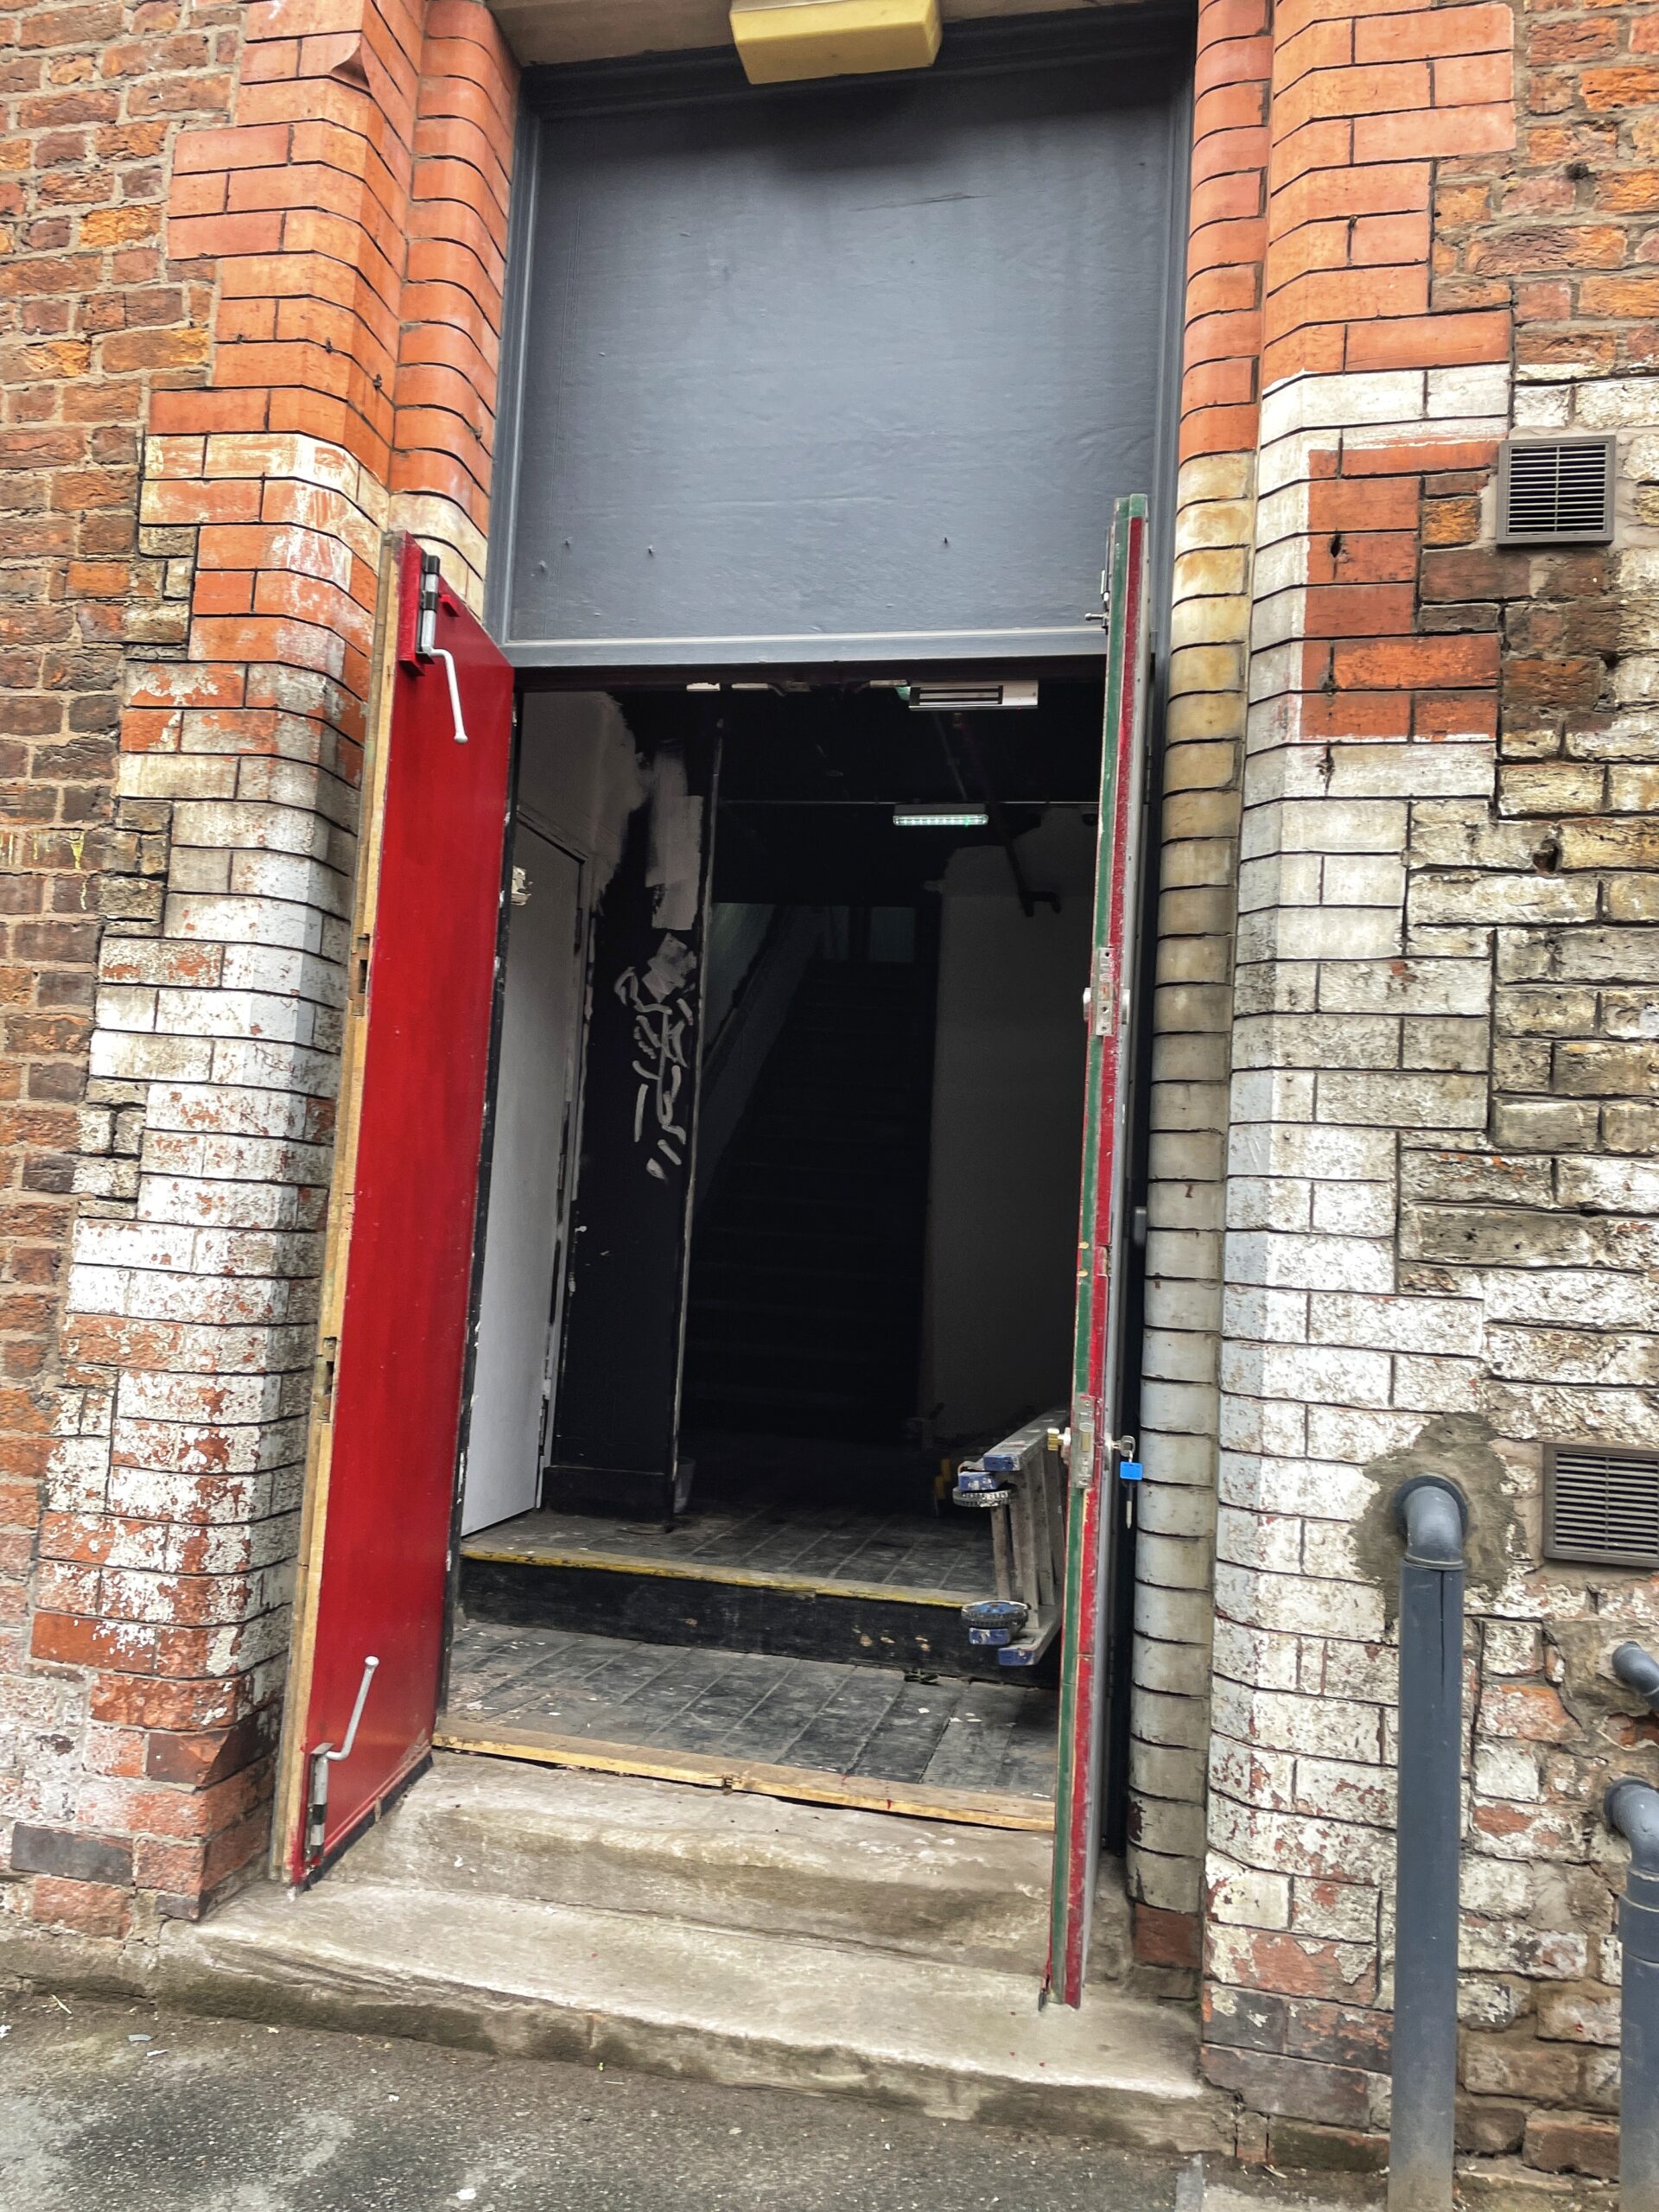 The entrance to Sankeys is now a fire escape. Credit: The Manc Group